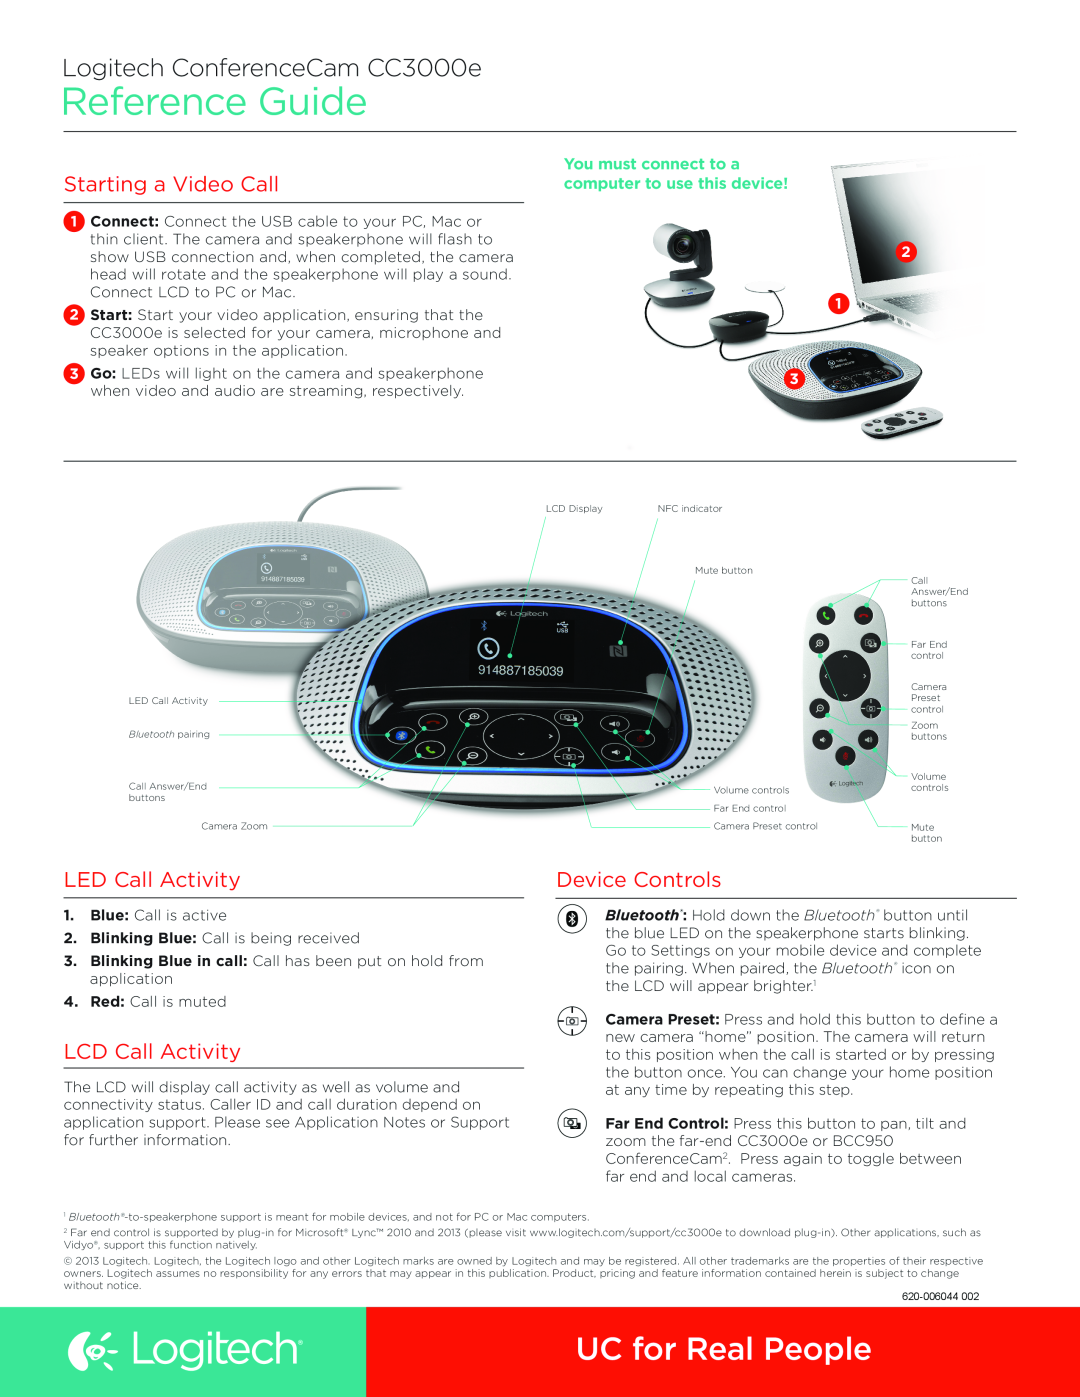 Logitech manual Reference Guide, UC for Real People, Logitech ConferenceCam CC3000e, Starting a Video Call 